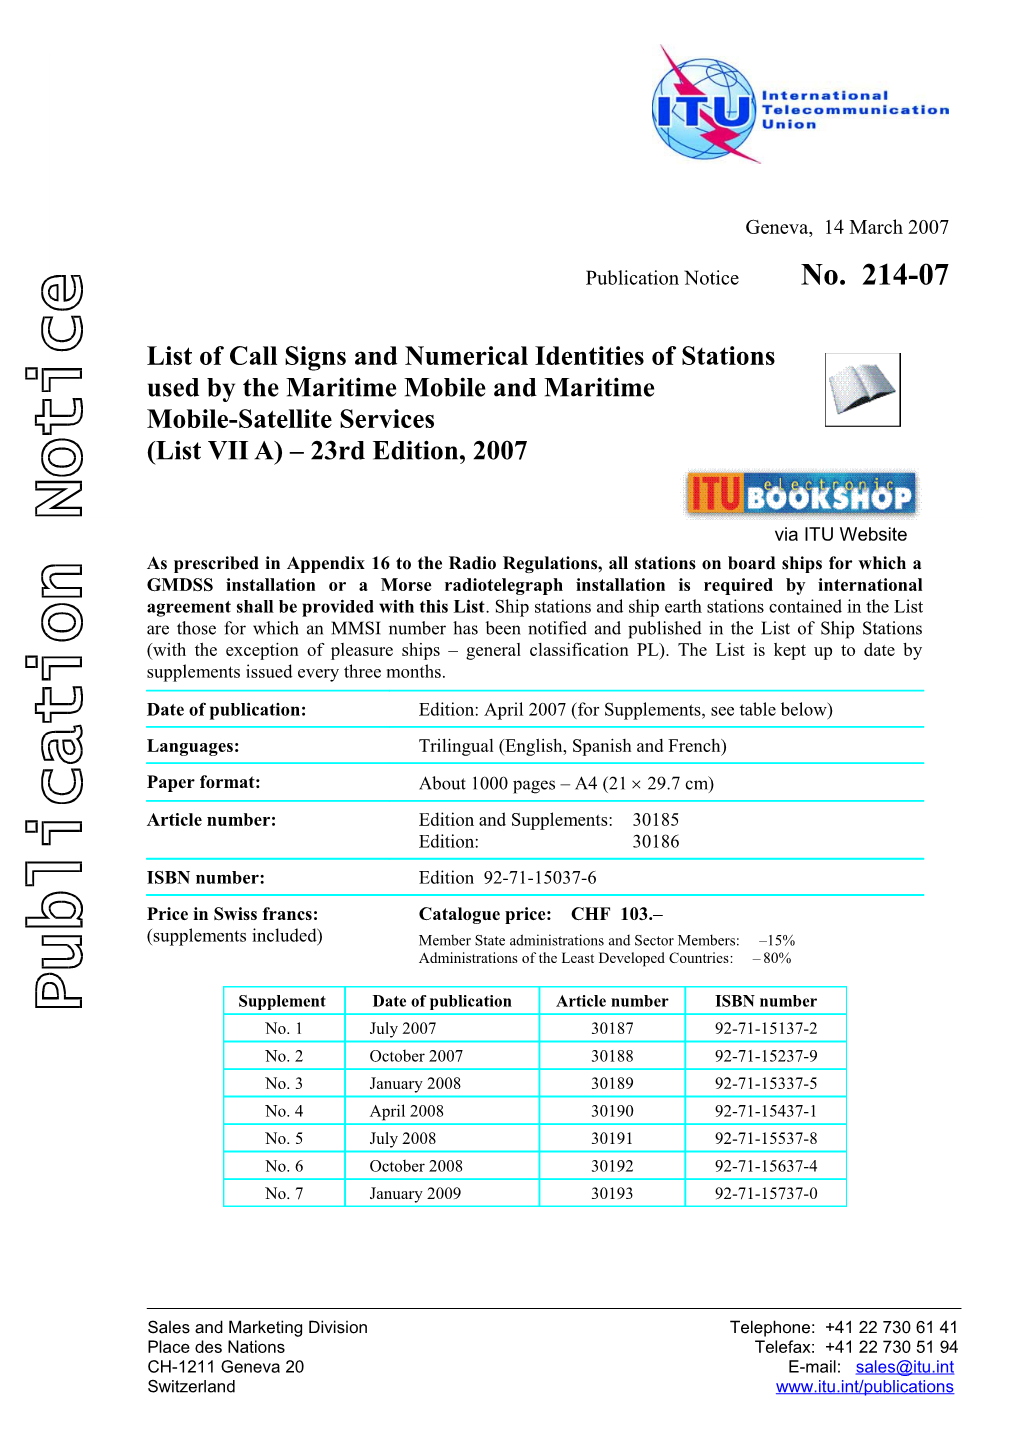 Publication Notice No. 214-07 List of Call Signs and Numerical Identities of Stations Used